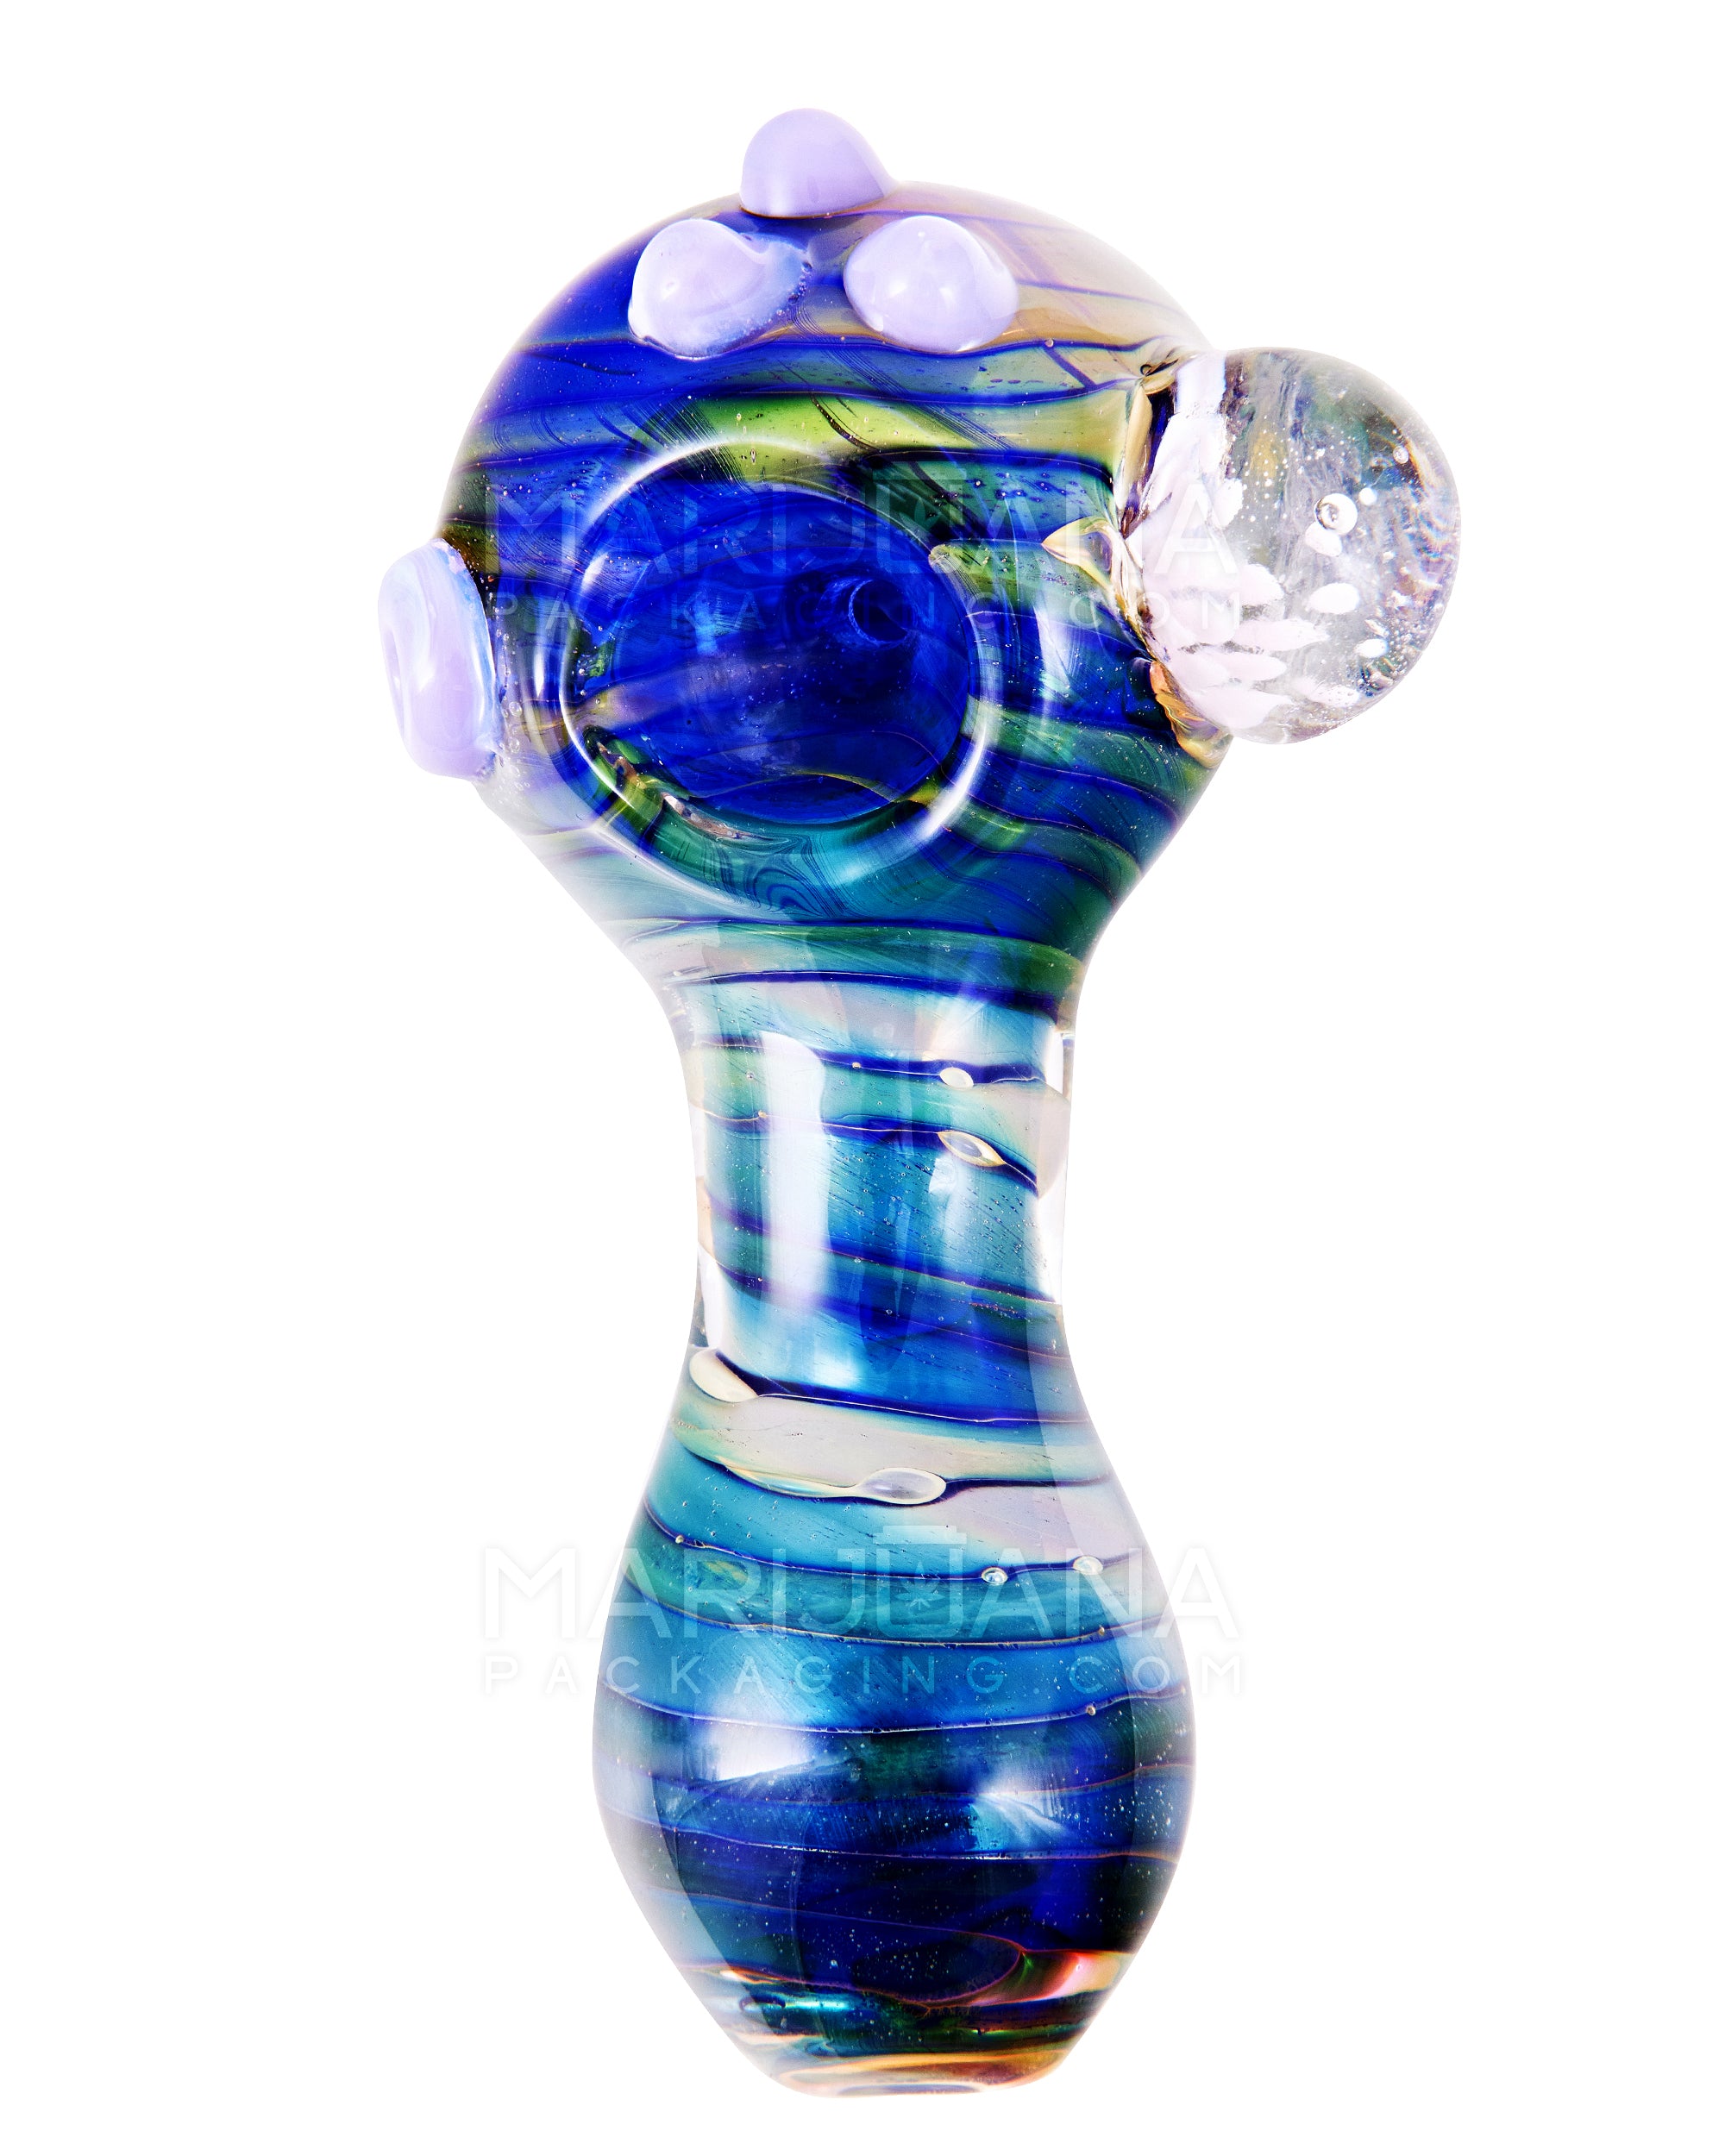 Fumed & Spiral Spoon Hand Pipe w/ Flower Implosion Marble & Triple Knockers | 4.5in Long - Glass - Assorted - 2